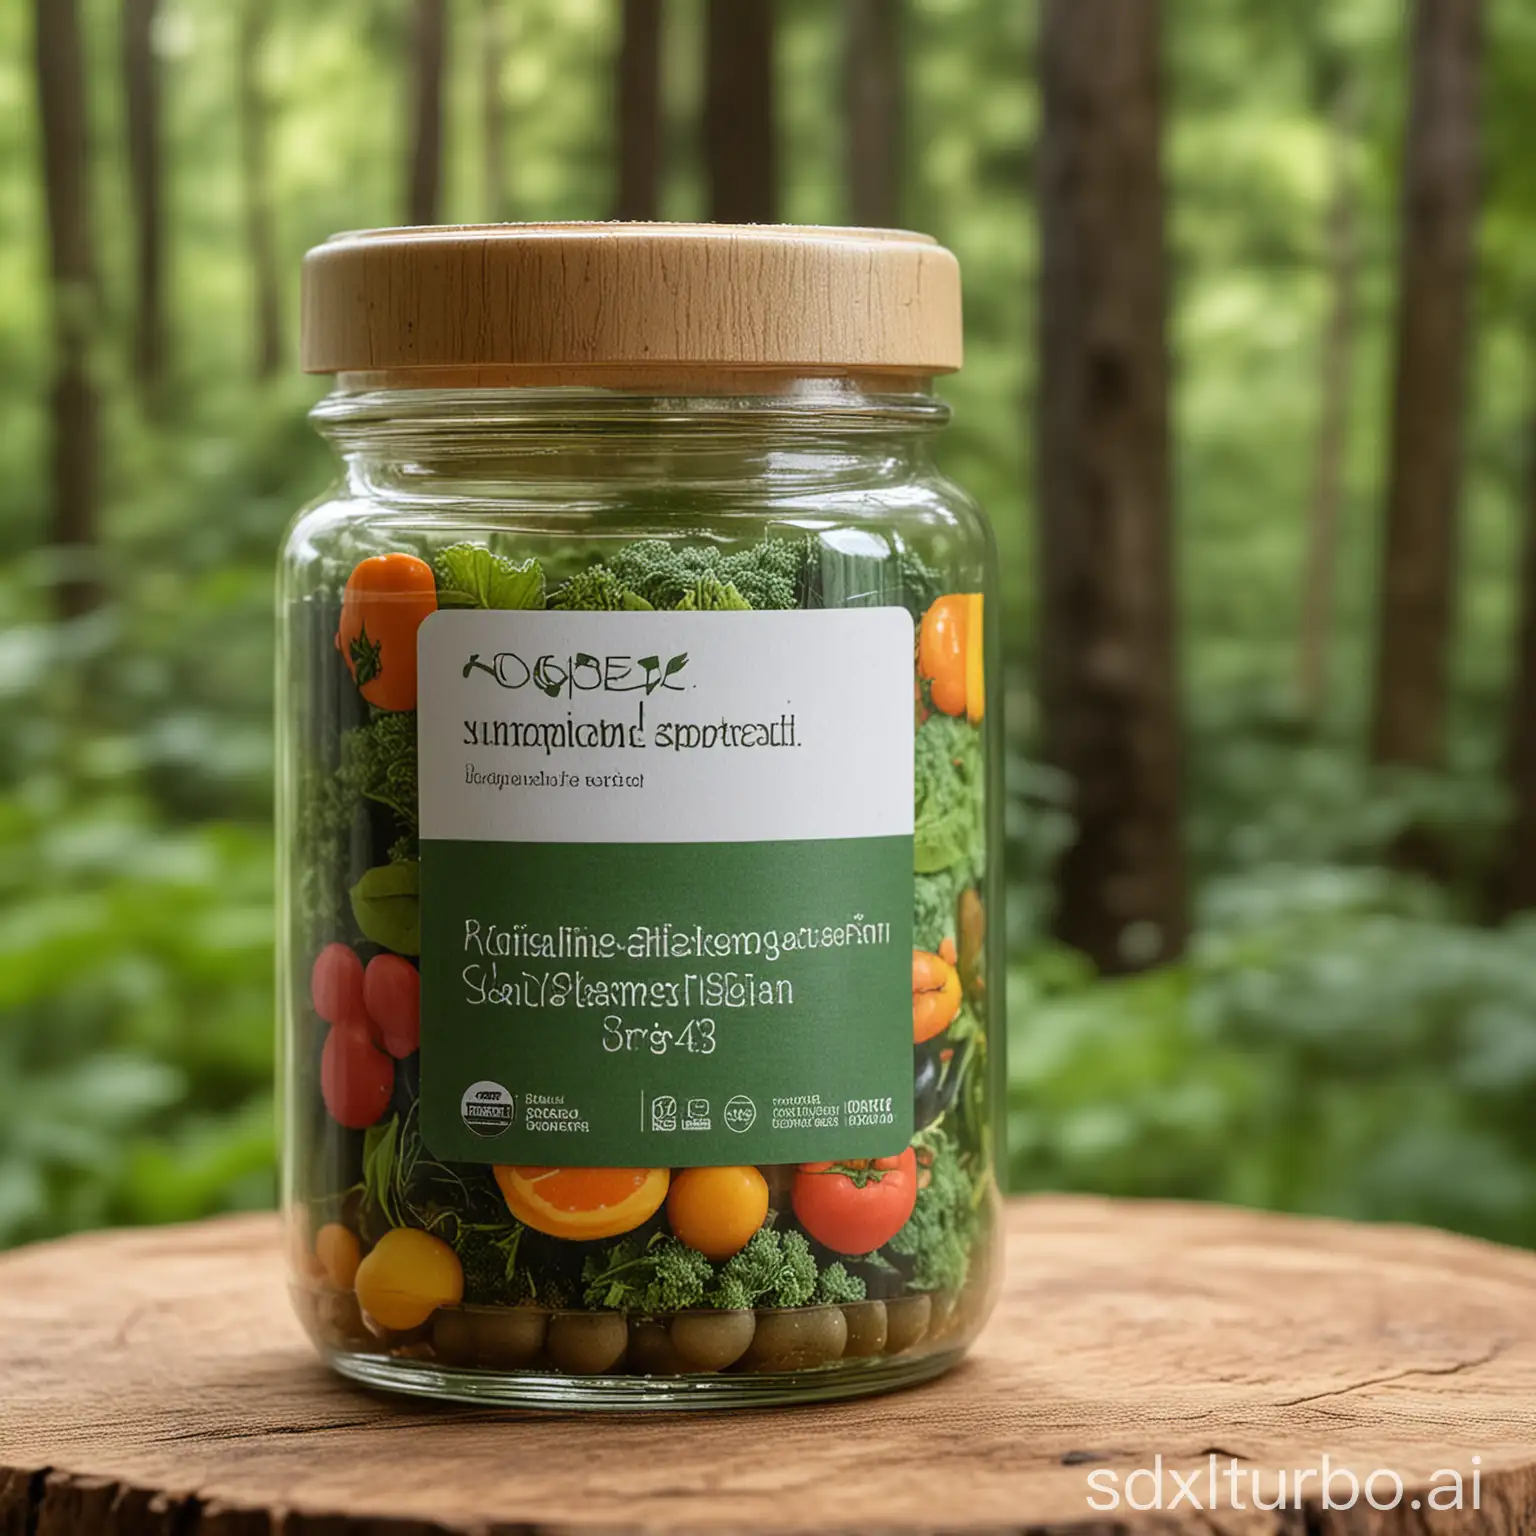 Organic-Superfood-Supplements-in-Glass-Jar-with-Lush-Forest-Background